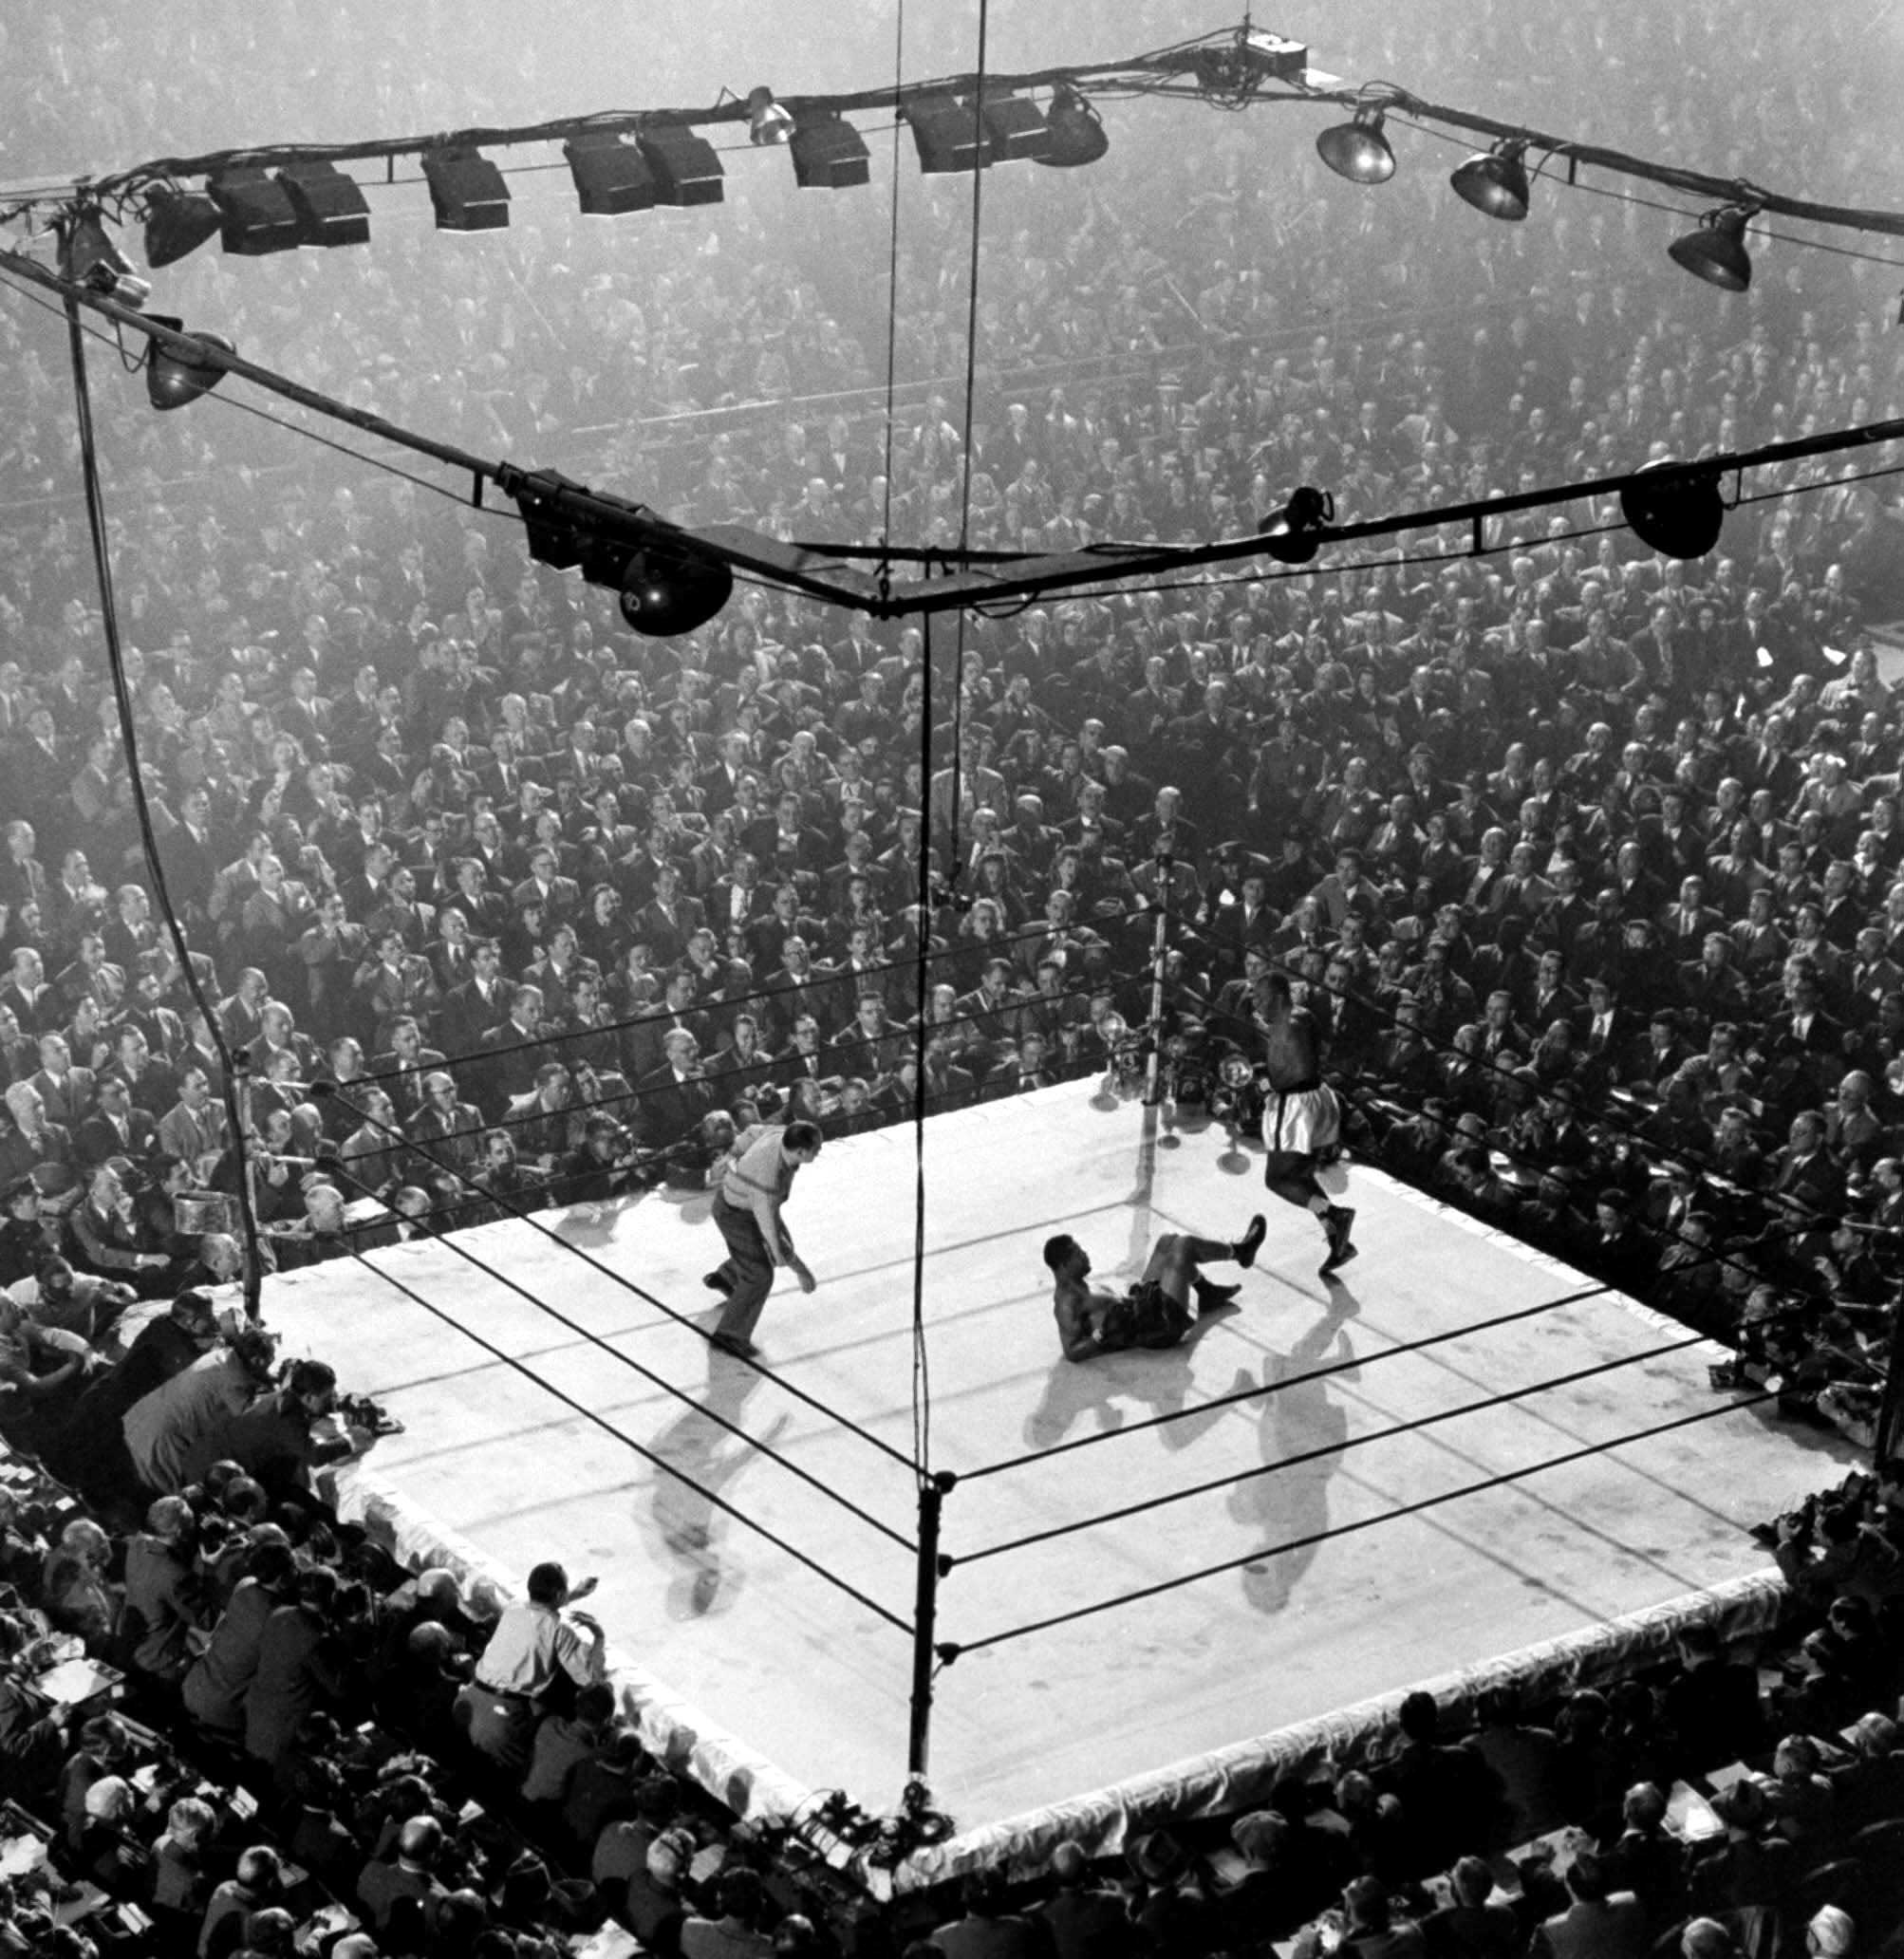 1947 | Heavyweight champ Joe Louis lies on the canvas at (the old, original) Madison Square Garden in New York after being floored by contender Jersey Joe Walcott in a December 1947 title match. Louis came back to win by a controversial decision. Originally published in the December 15, 1947 issue of LIFE.